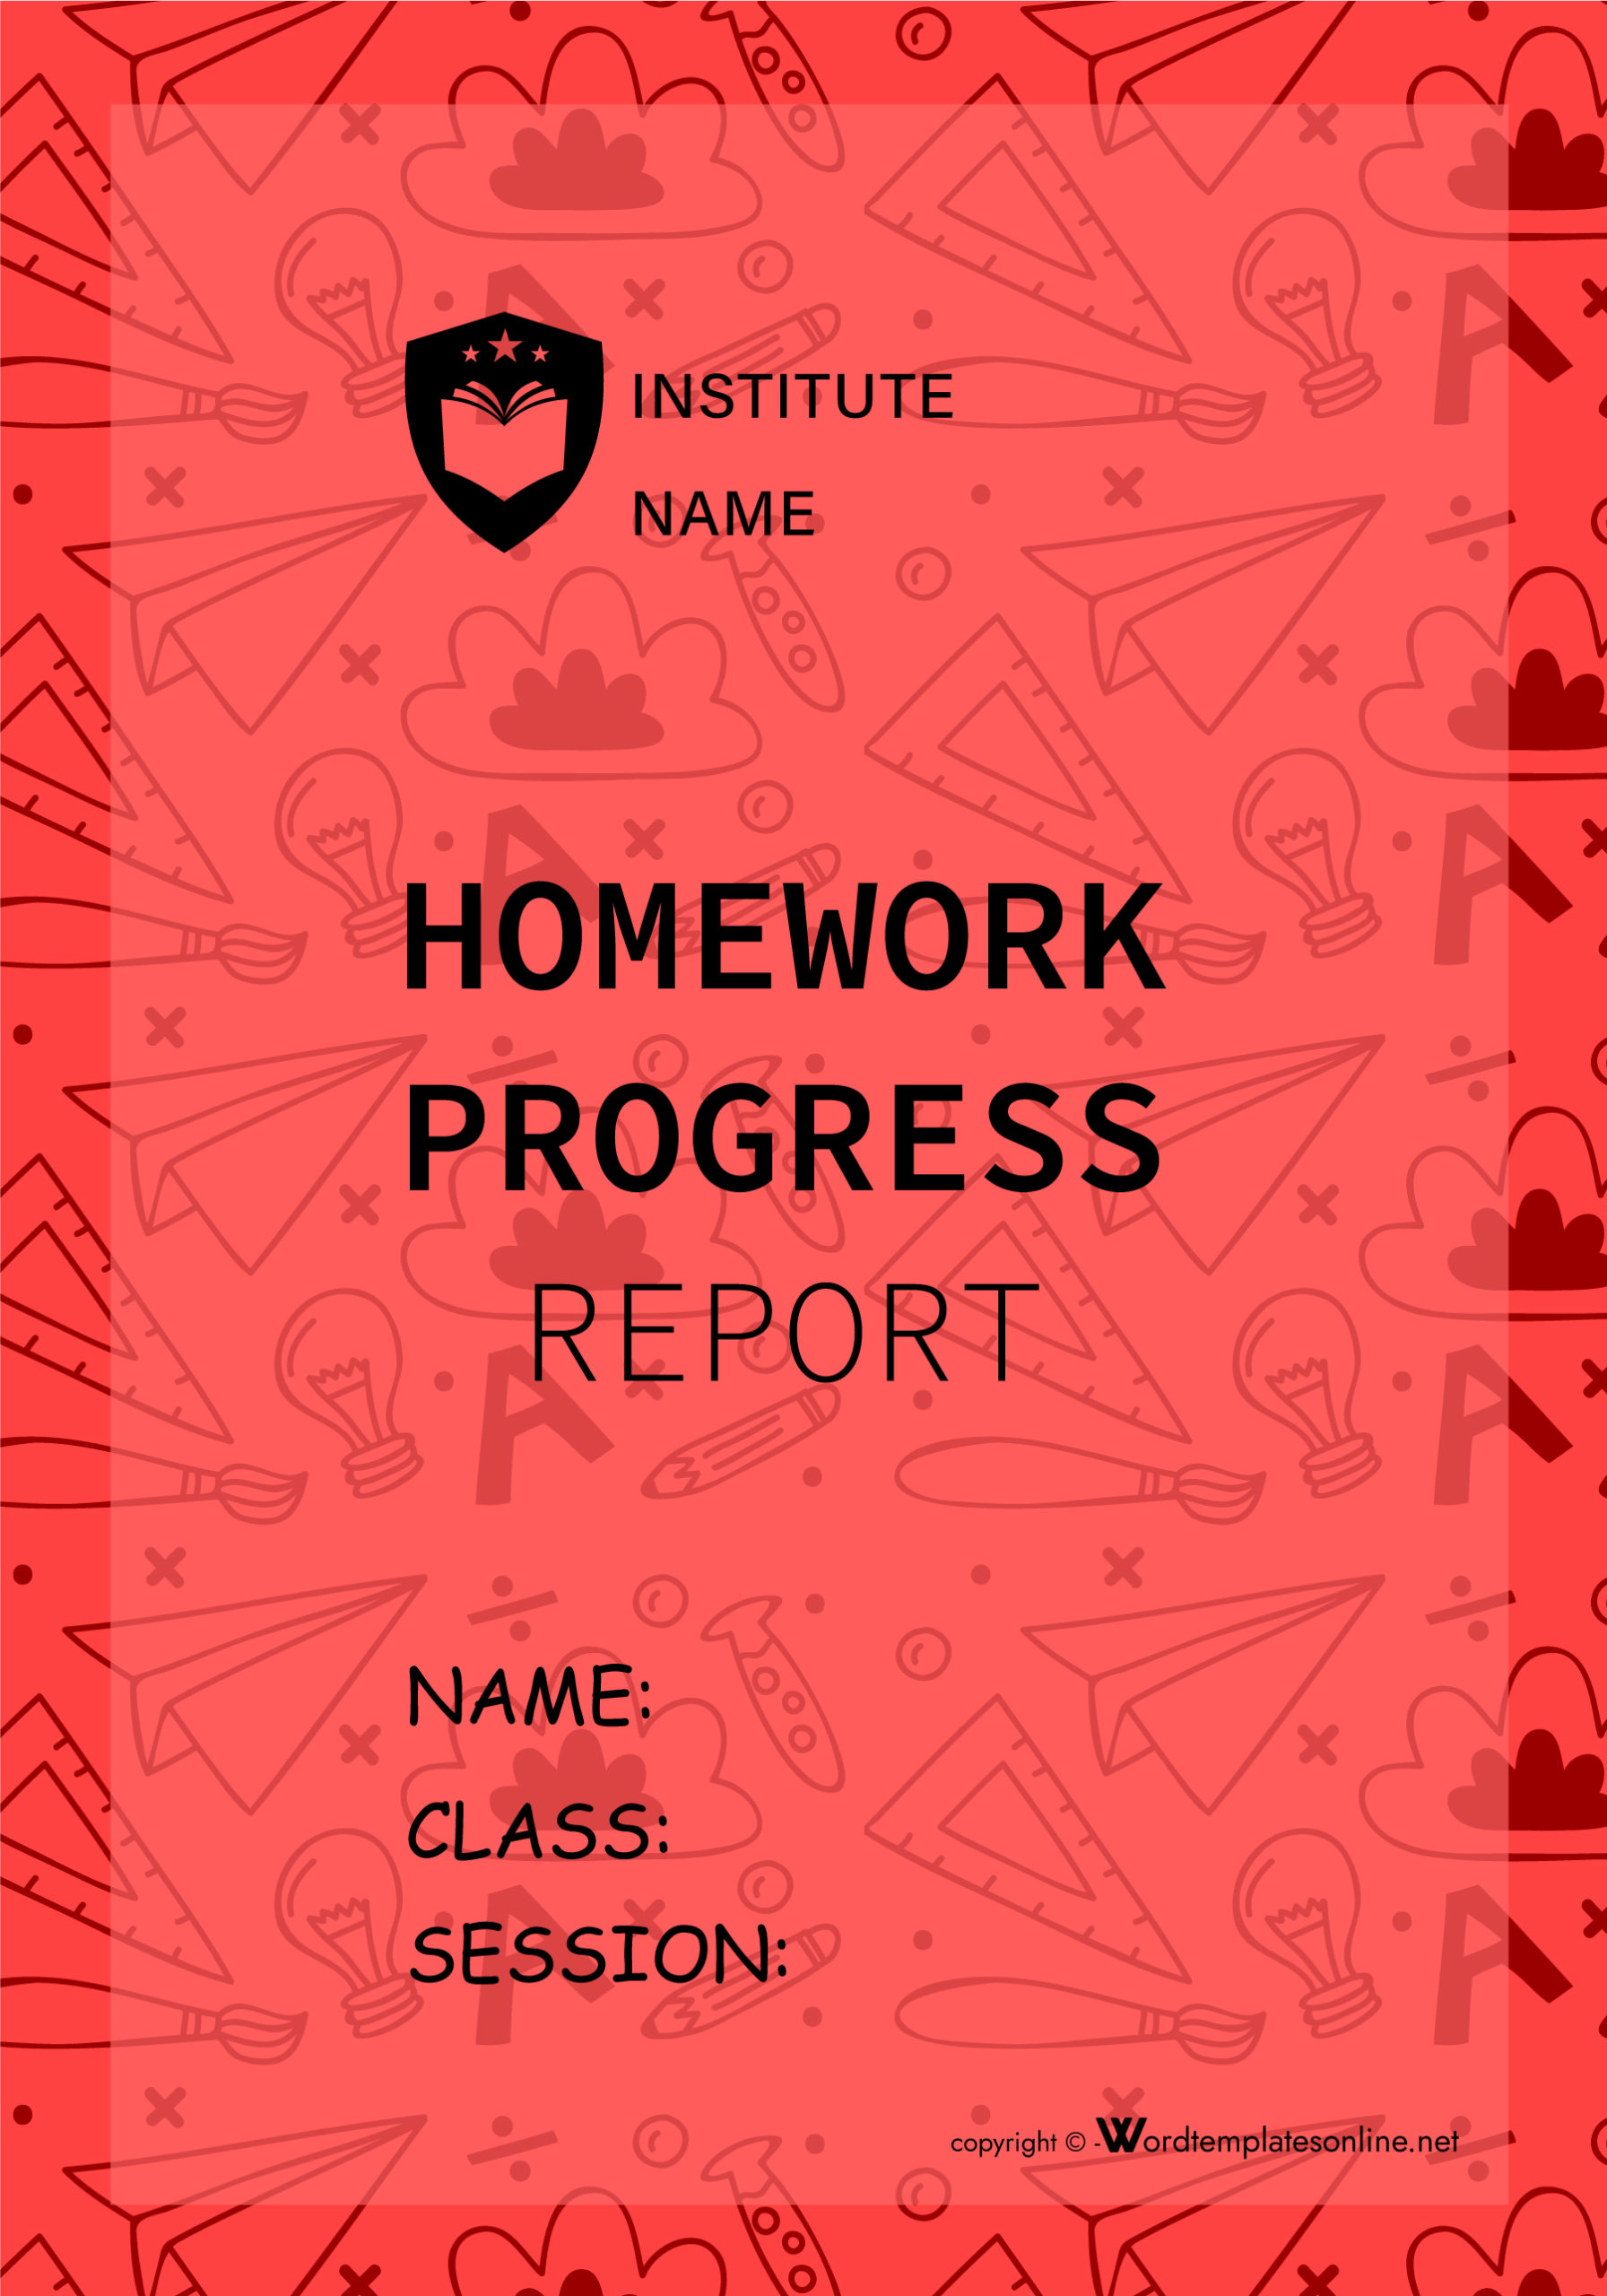 Homework Report Cover Page Illustrator Template - Free Download